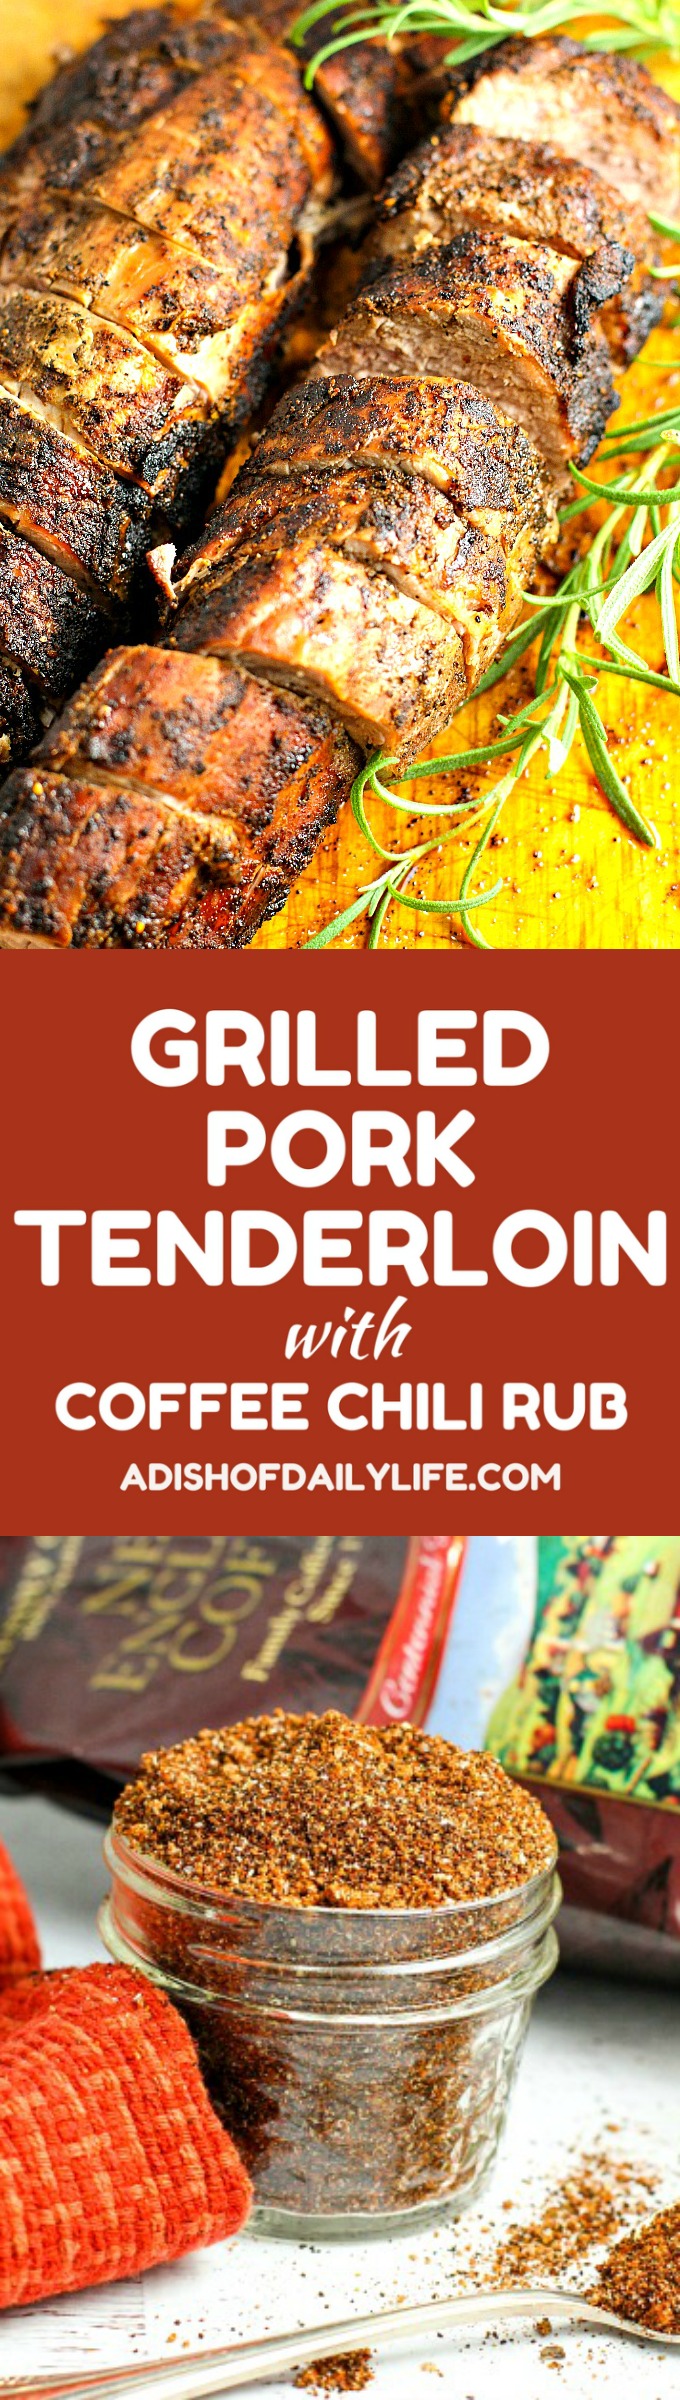 These delicious Grilled Pork Tenderloins are rubbed with a Coffee Chili dry rub before grilling, creating a "crust" packed with flavor that also helps keeps the tenderloin tender and juicy! This easy recipe is sure to be a hit at your next BBQ!